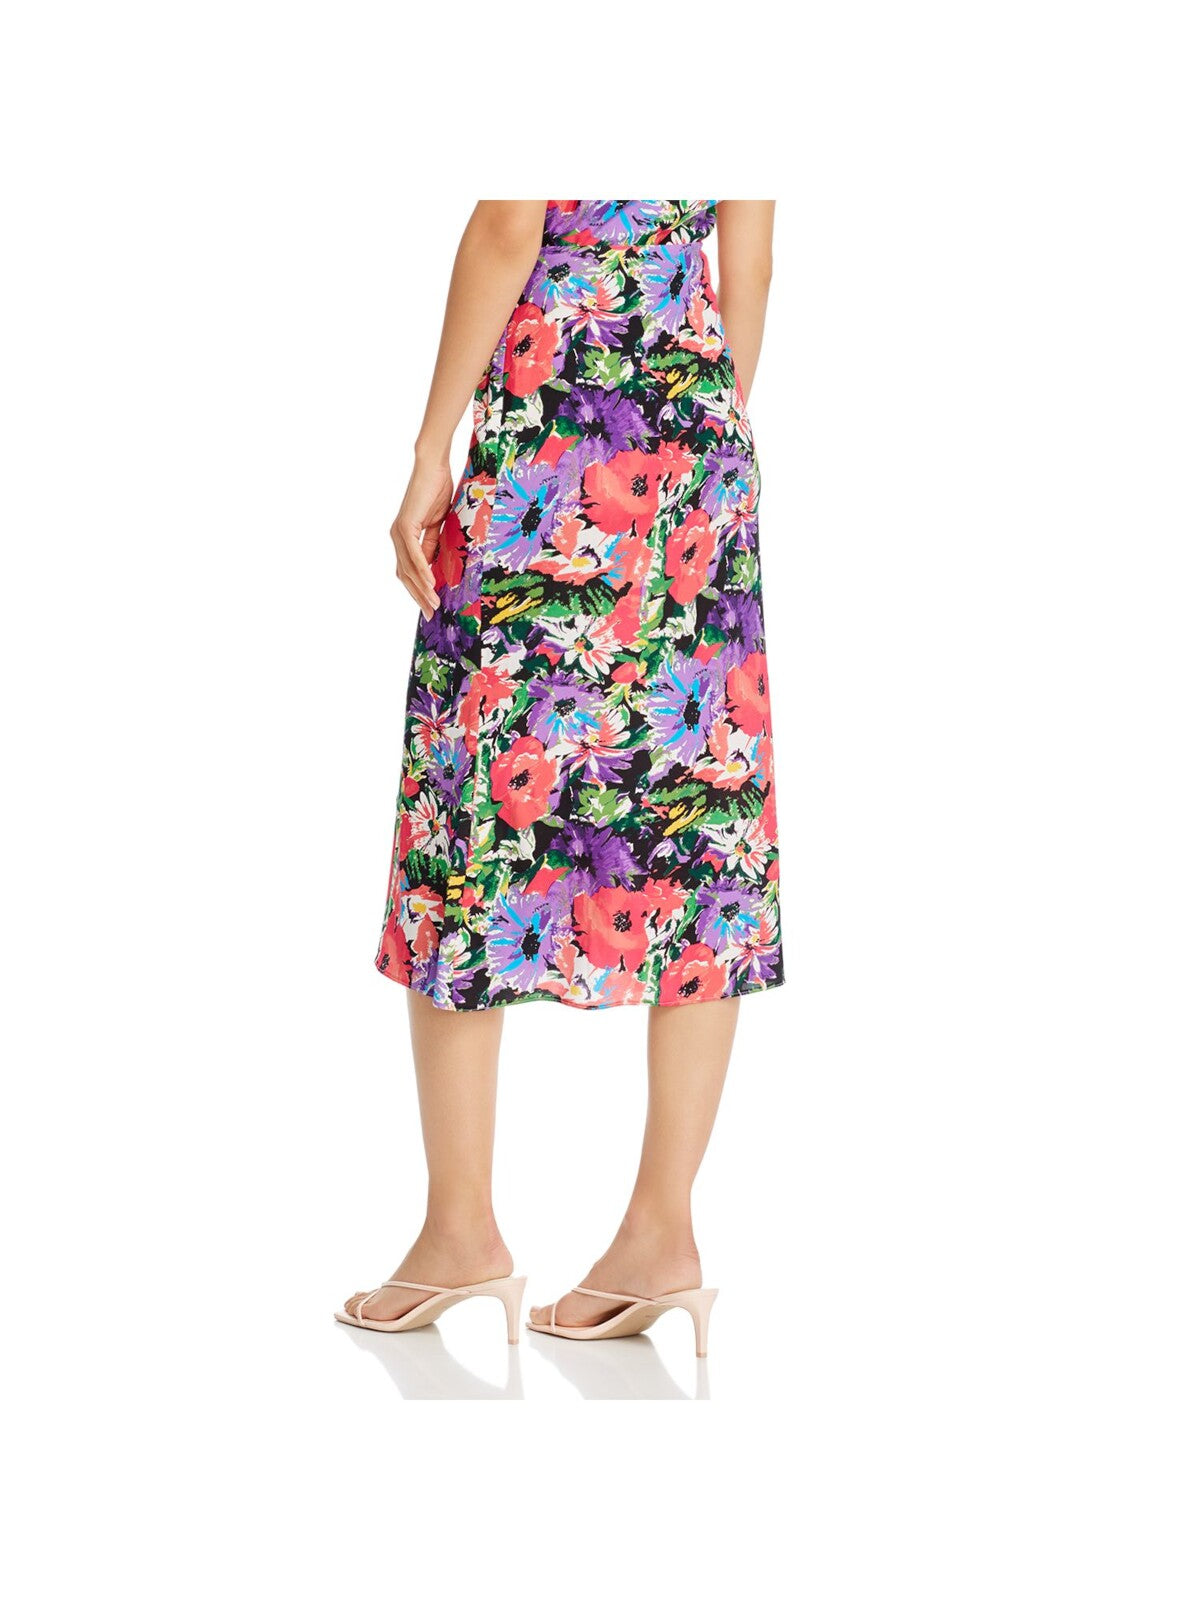 ART DEALER Womens Black Gathered Tie Floral Midi Party A-Line Skirt XS